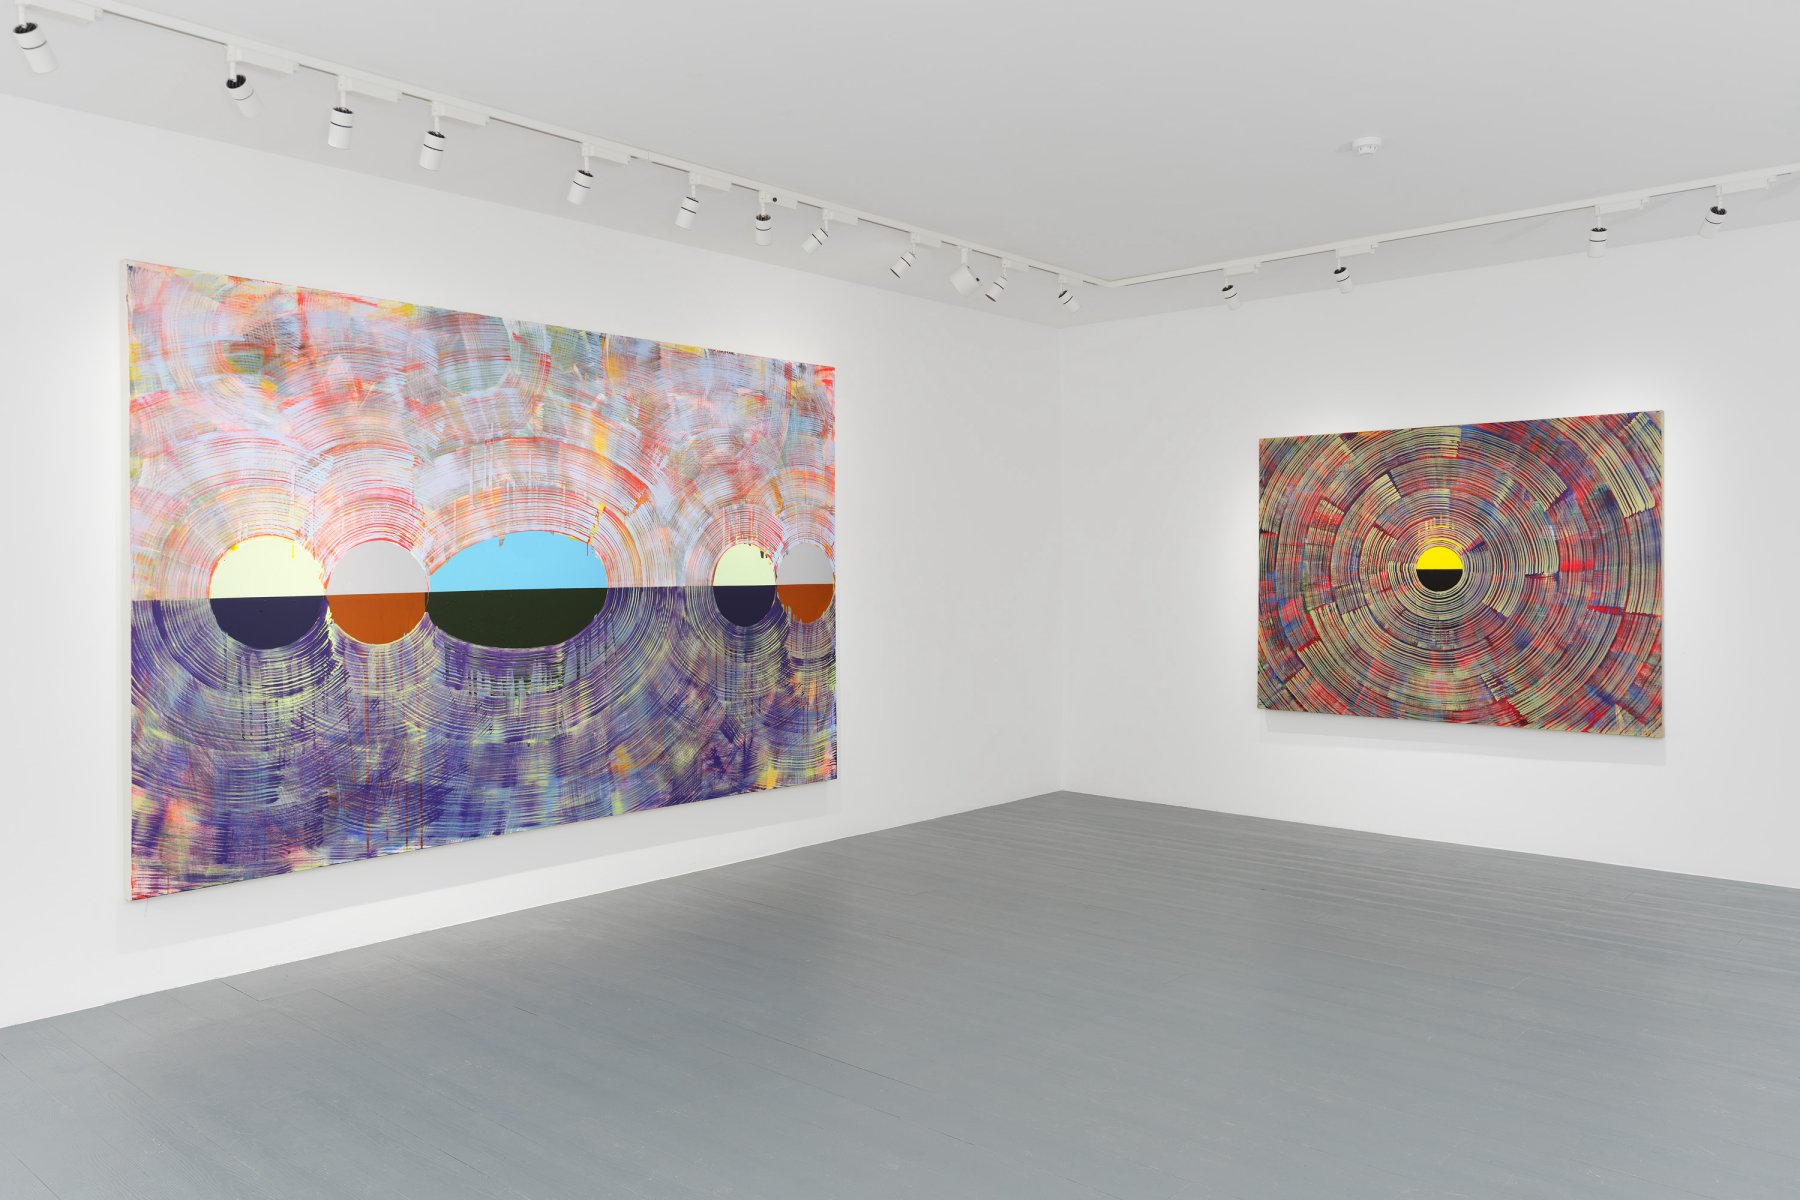 Installation image for Tim Allen: The Water In The Well, at JGM Gallery